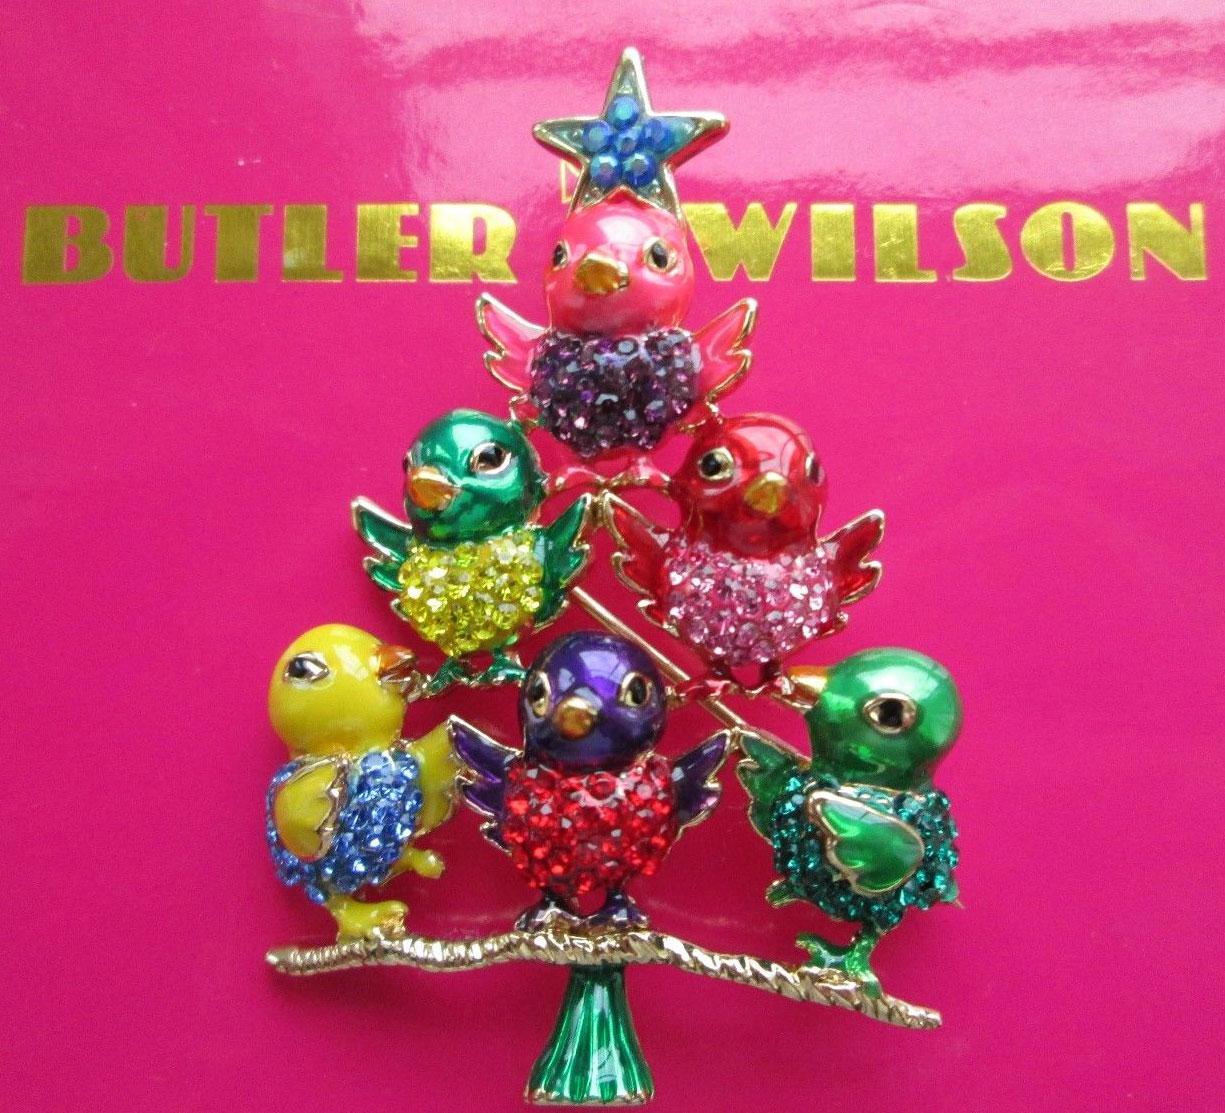 Delightful signed BUTLER & WILSON Bird Tree brooch featuring graduating rows of glossy enamel chicks in tones of pink emerald, red, yellow and purple, enhanced with sparkling faceted seed glass breasts in the same tones; gold tone petite beaks. Roll